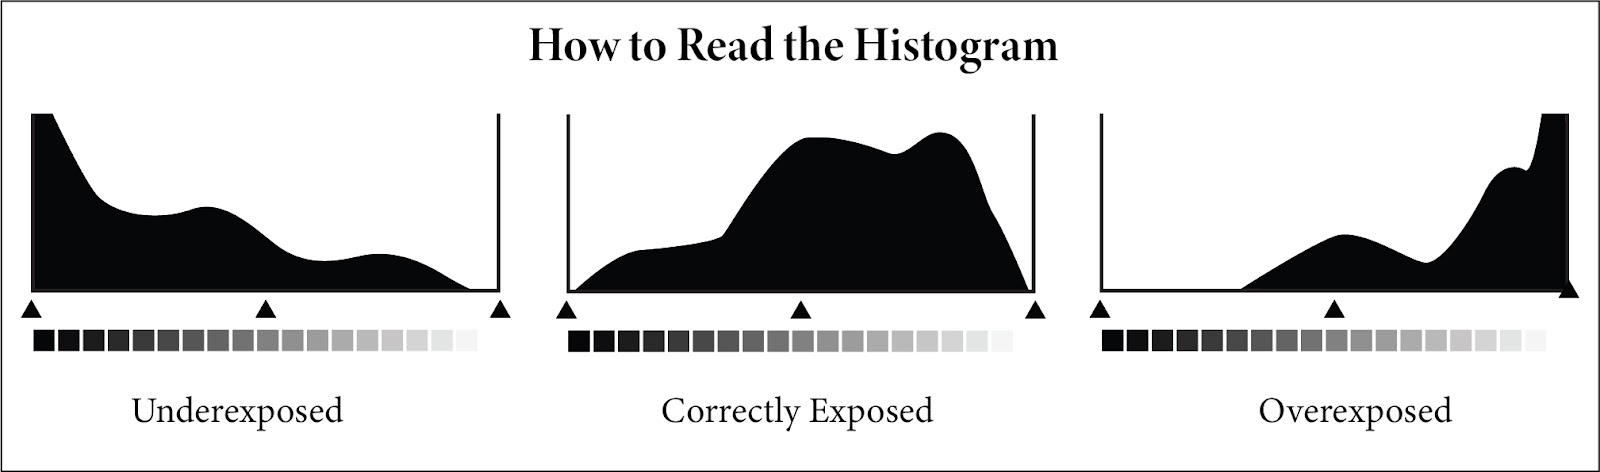 how to read a histogram